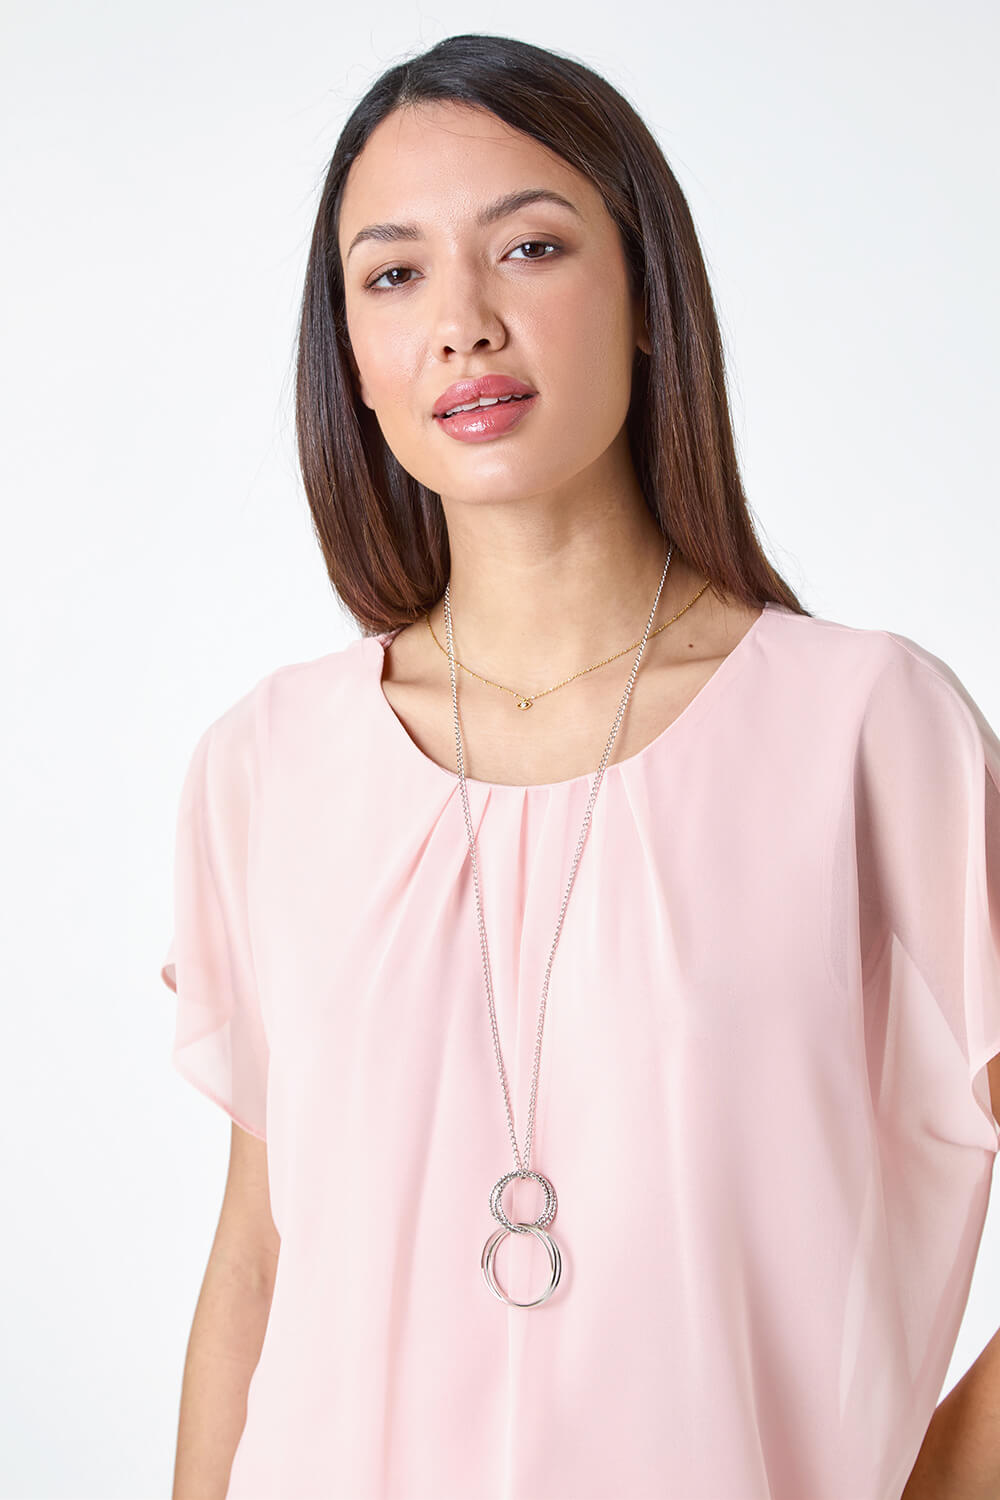 Light Pink Chiffon Jersey Blouson Top with Necklace, Image 4 of 5